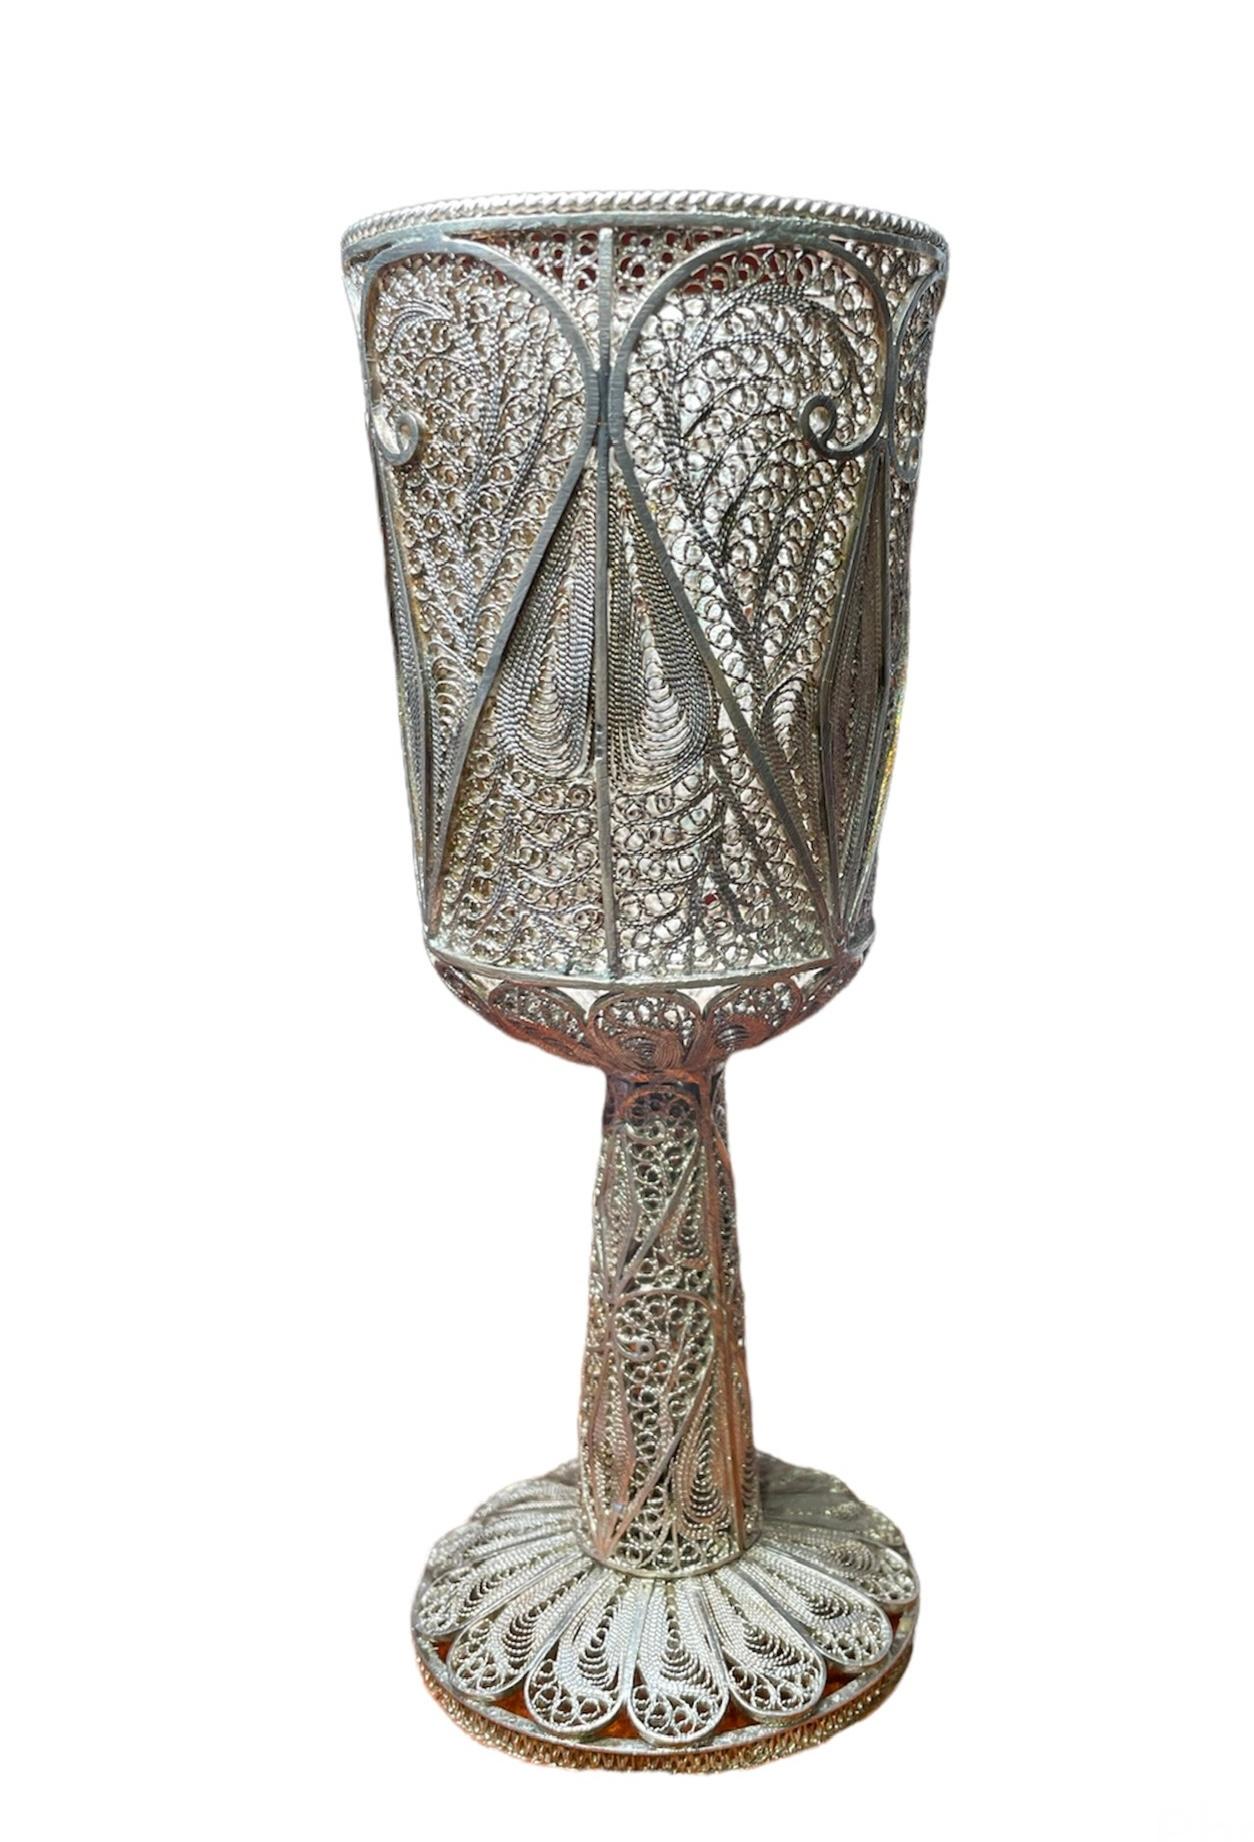 This is a silver 925 filigree cup/goblet. It is entirely decorated with very well done filigree work. There are large sizes of hearts and long diamonds adorning the bowl part of the cup and smaller ones doing the same at the stem. The bottom of the